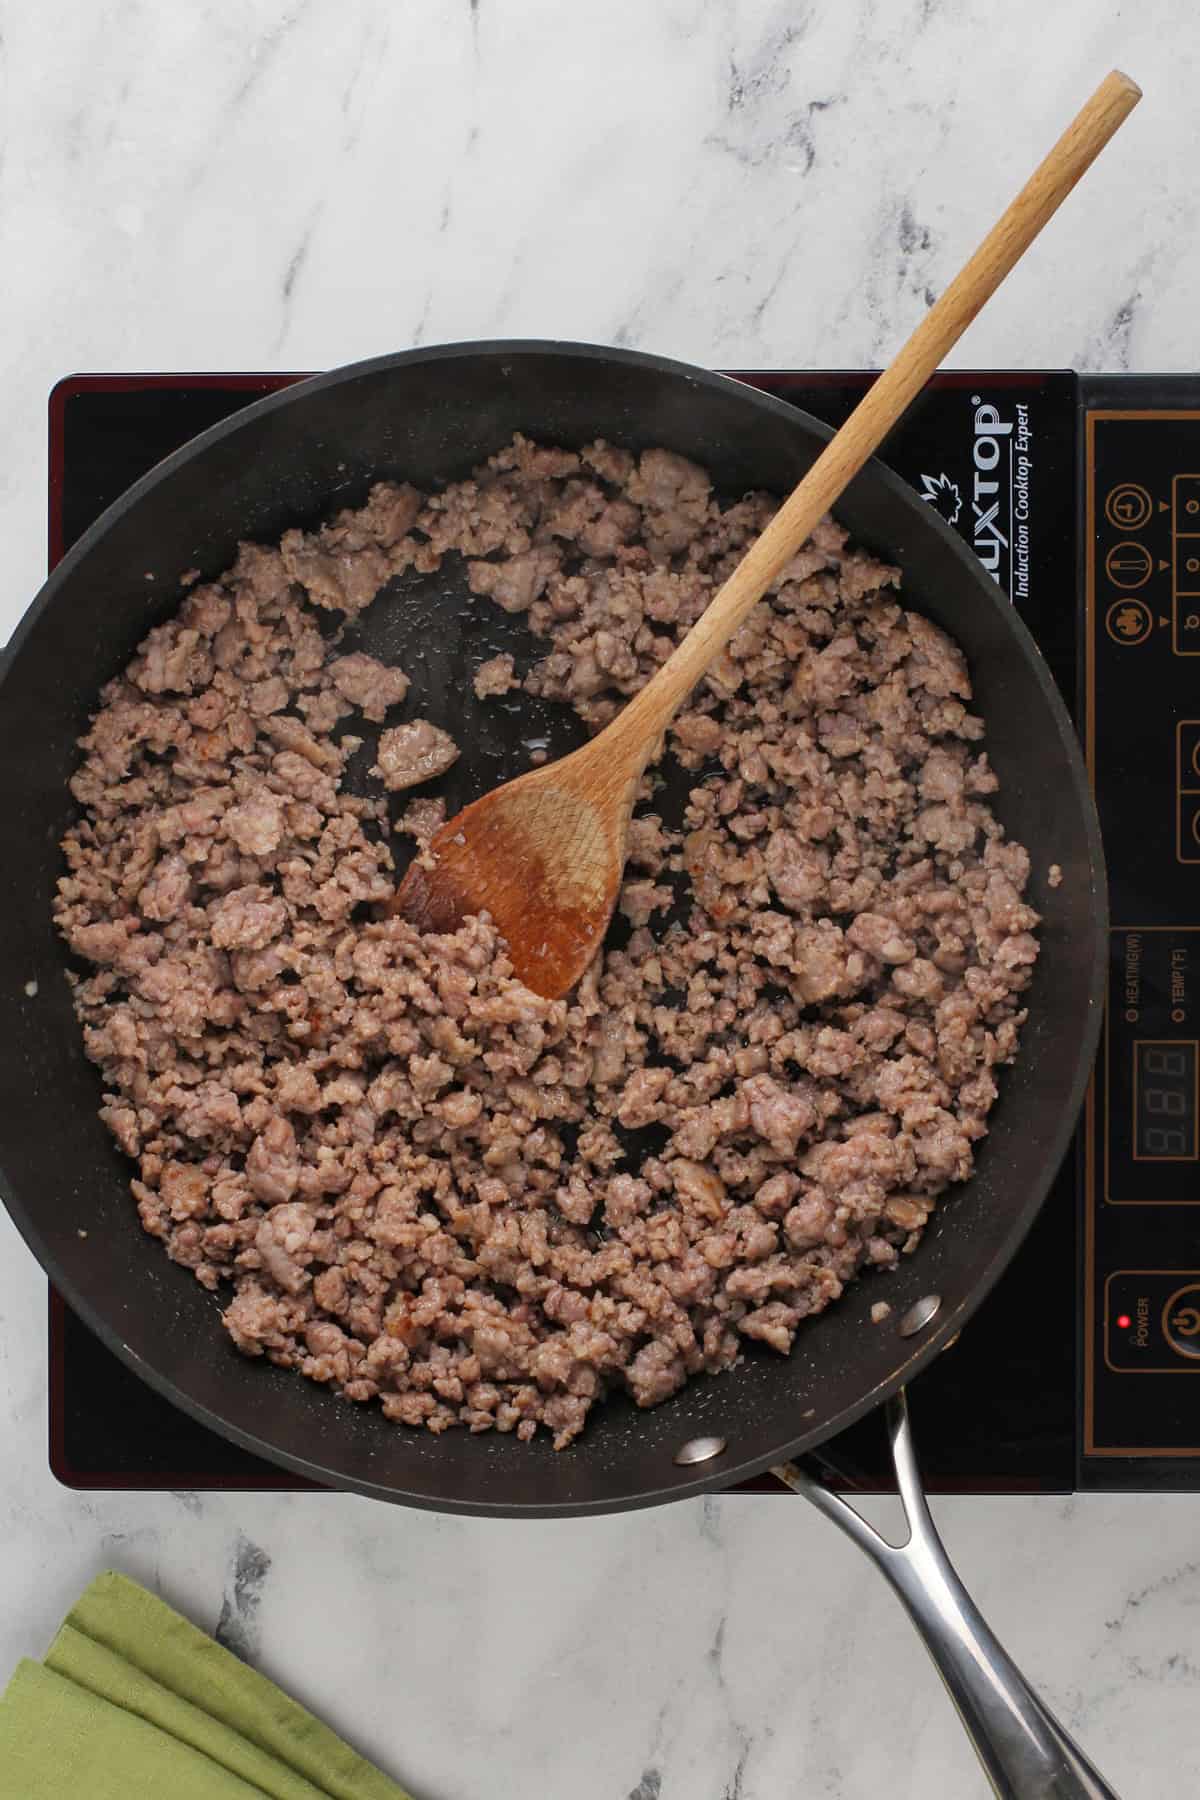 Cooked breakfast sausage in a black skillet.